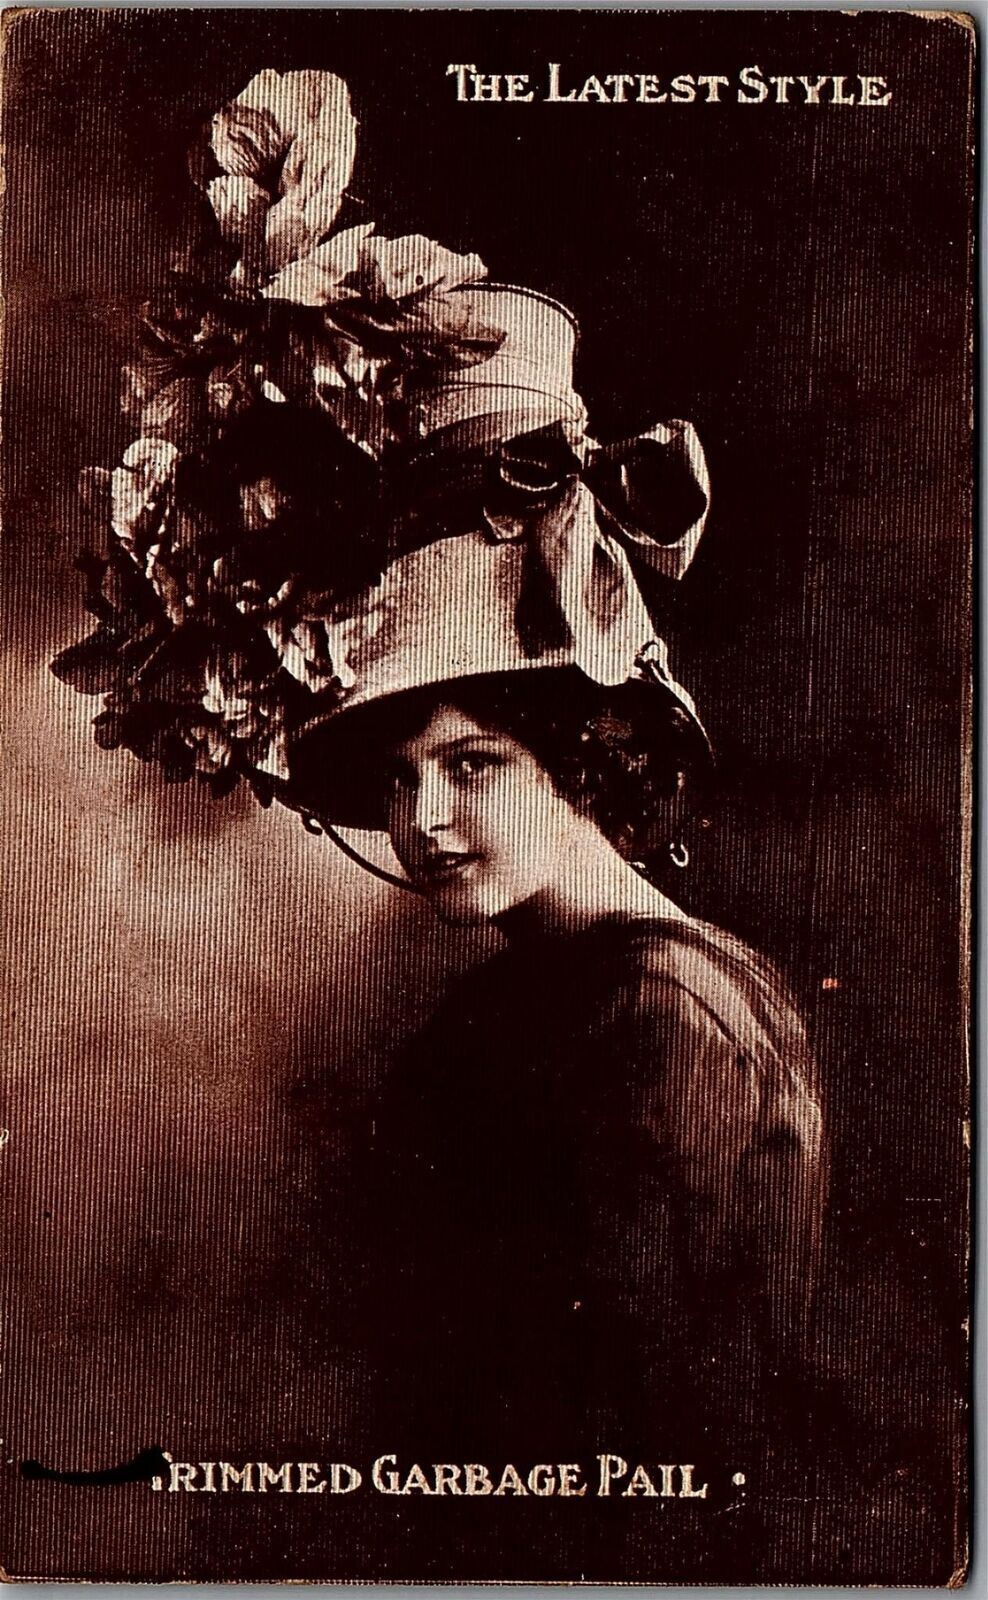 1910 PRETTY WOMAN TRIMMED GARBAGE PAIL HAT LATEST STYLE POSTCARD 39-21